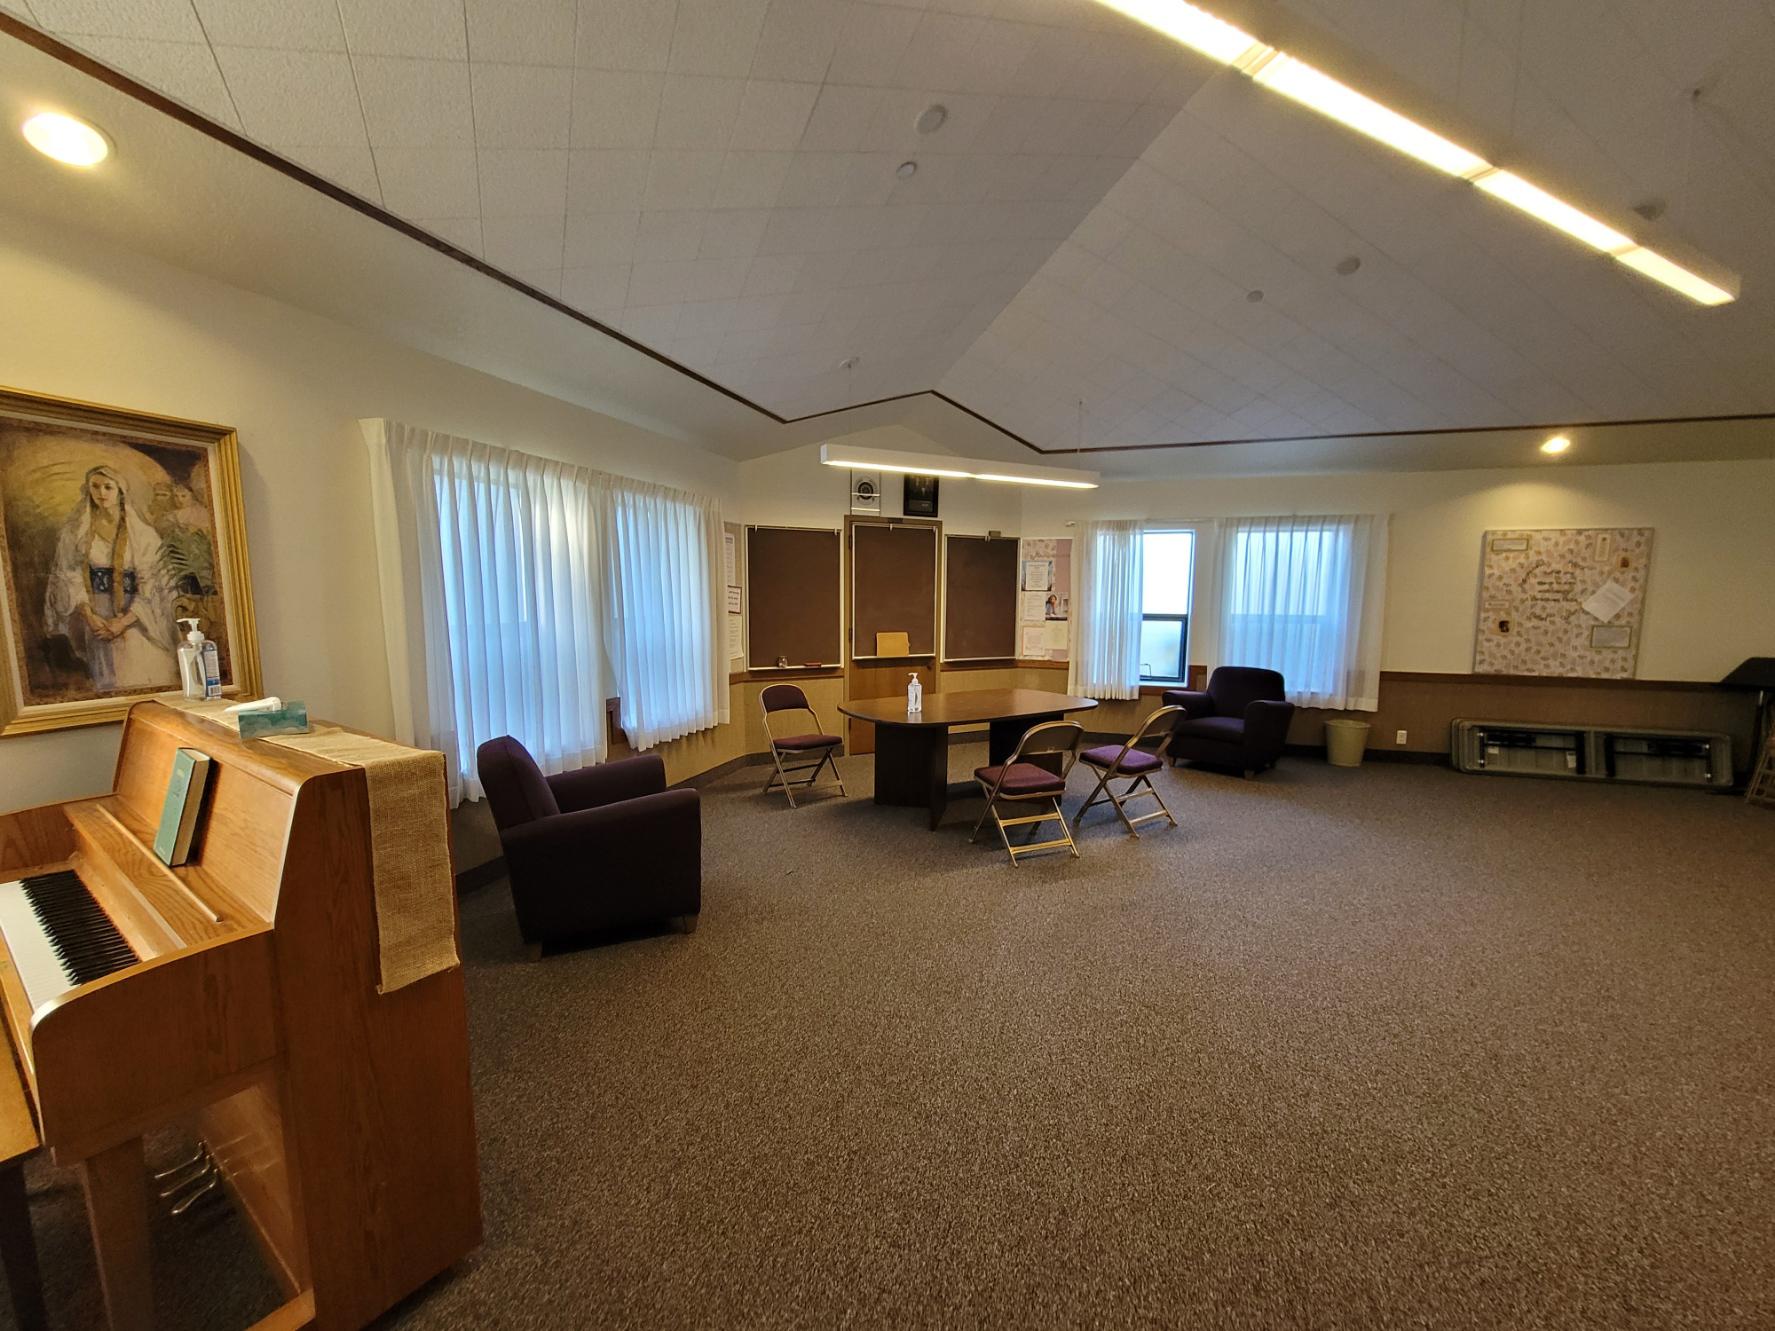 Relief Society Room, a women's classroom, at  The Church of Jesus Christ of Latter-day Saints